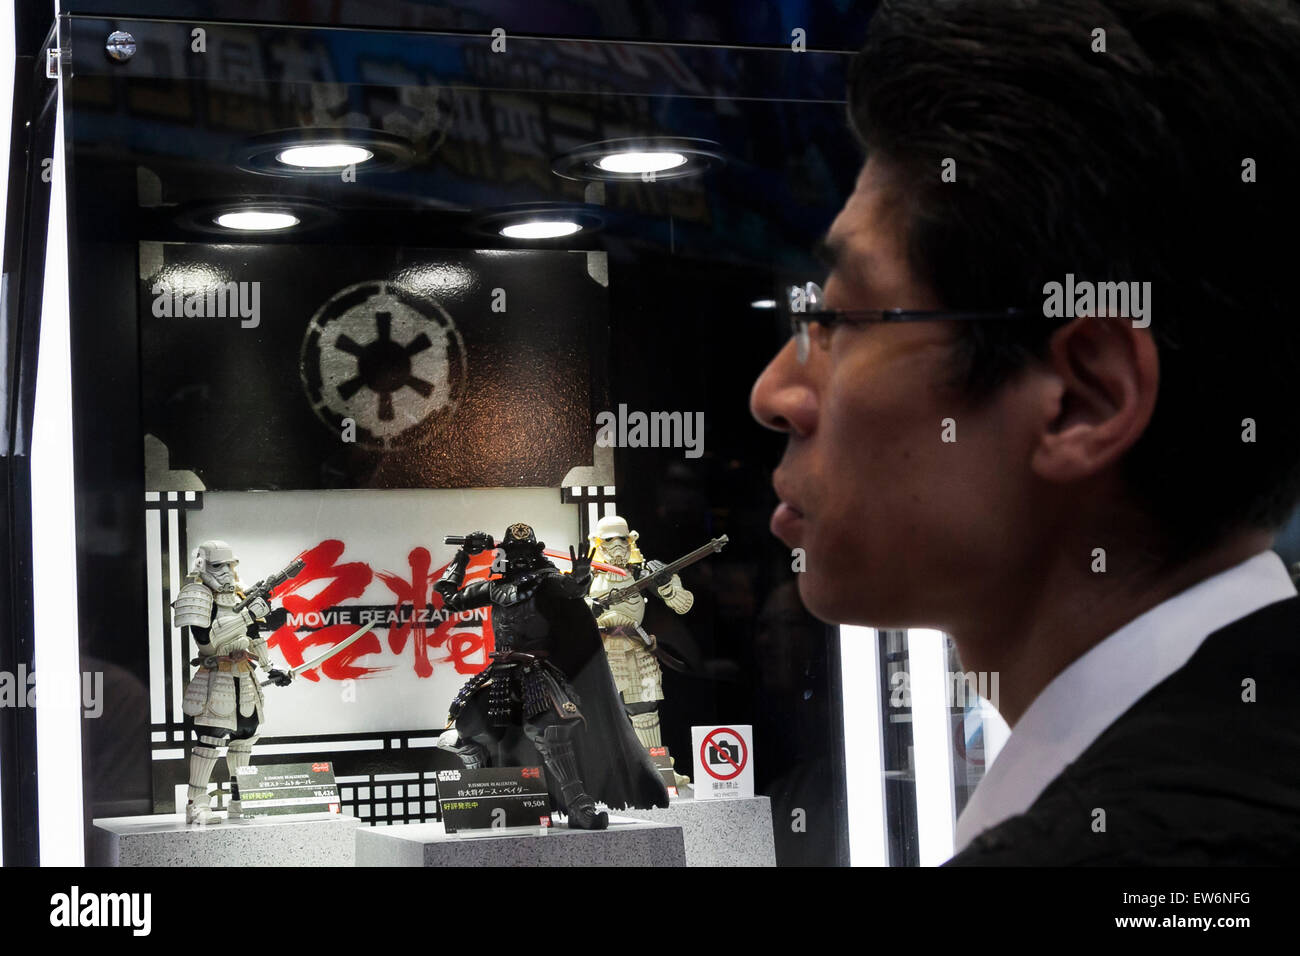 A man passes next to the action figures of Star Wars at the International Tokyo Toy Show 2015 in Tokyo Big Sight on June 18, 2015, Tokyo, Japan. Japan's largest trade show for toy makers attracts buyers and collectors by introducing the latest products from different toymakers from Japan and overseas. The toy fair showcases about 35,000 toys from 149 domestic and foreign companies and is held over four days. © Rodrigo Reyes Marin/AFLO/Alamy Live News Stock Photo